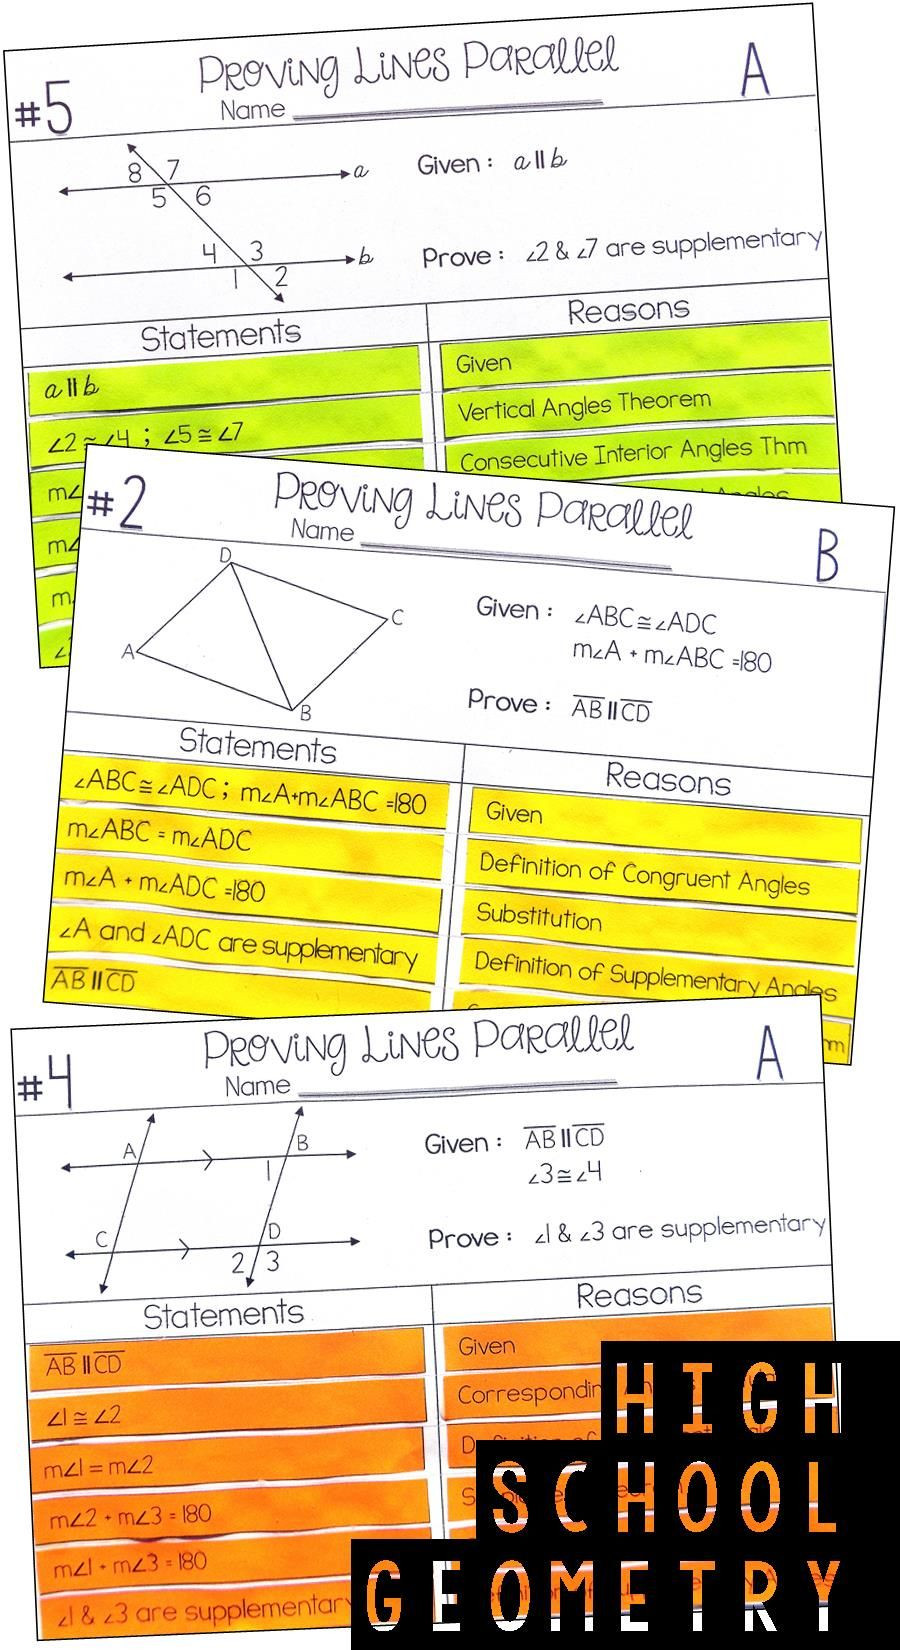 Proving Lines Parallel Worksheet Proving Lines Parallel Proof Activity High School Geometry